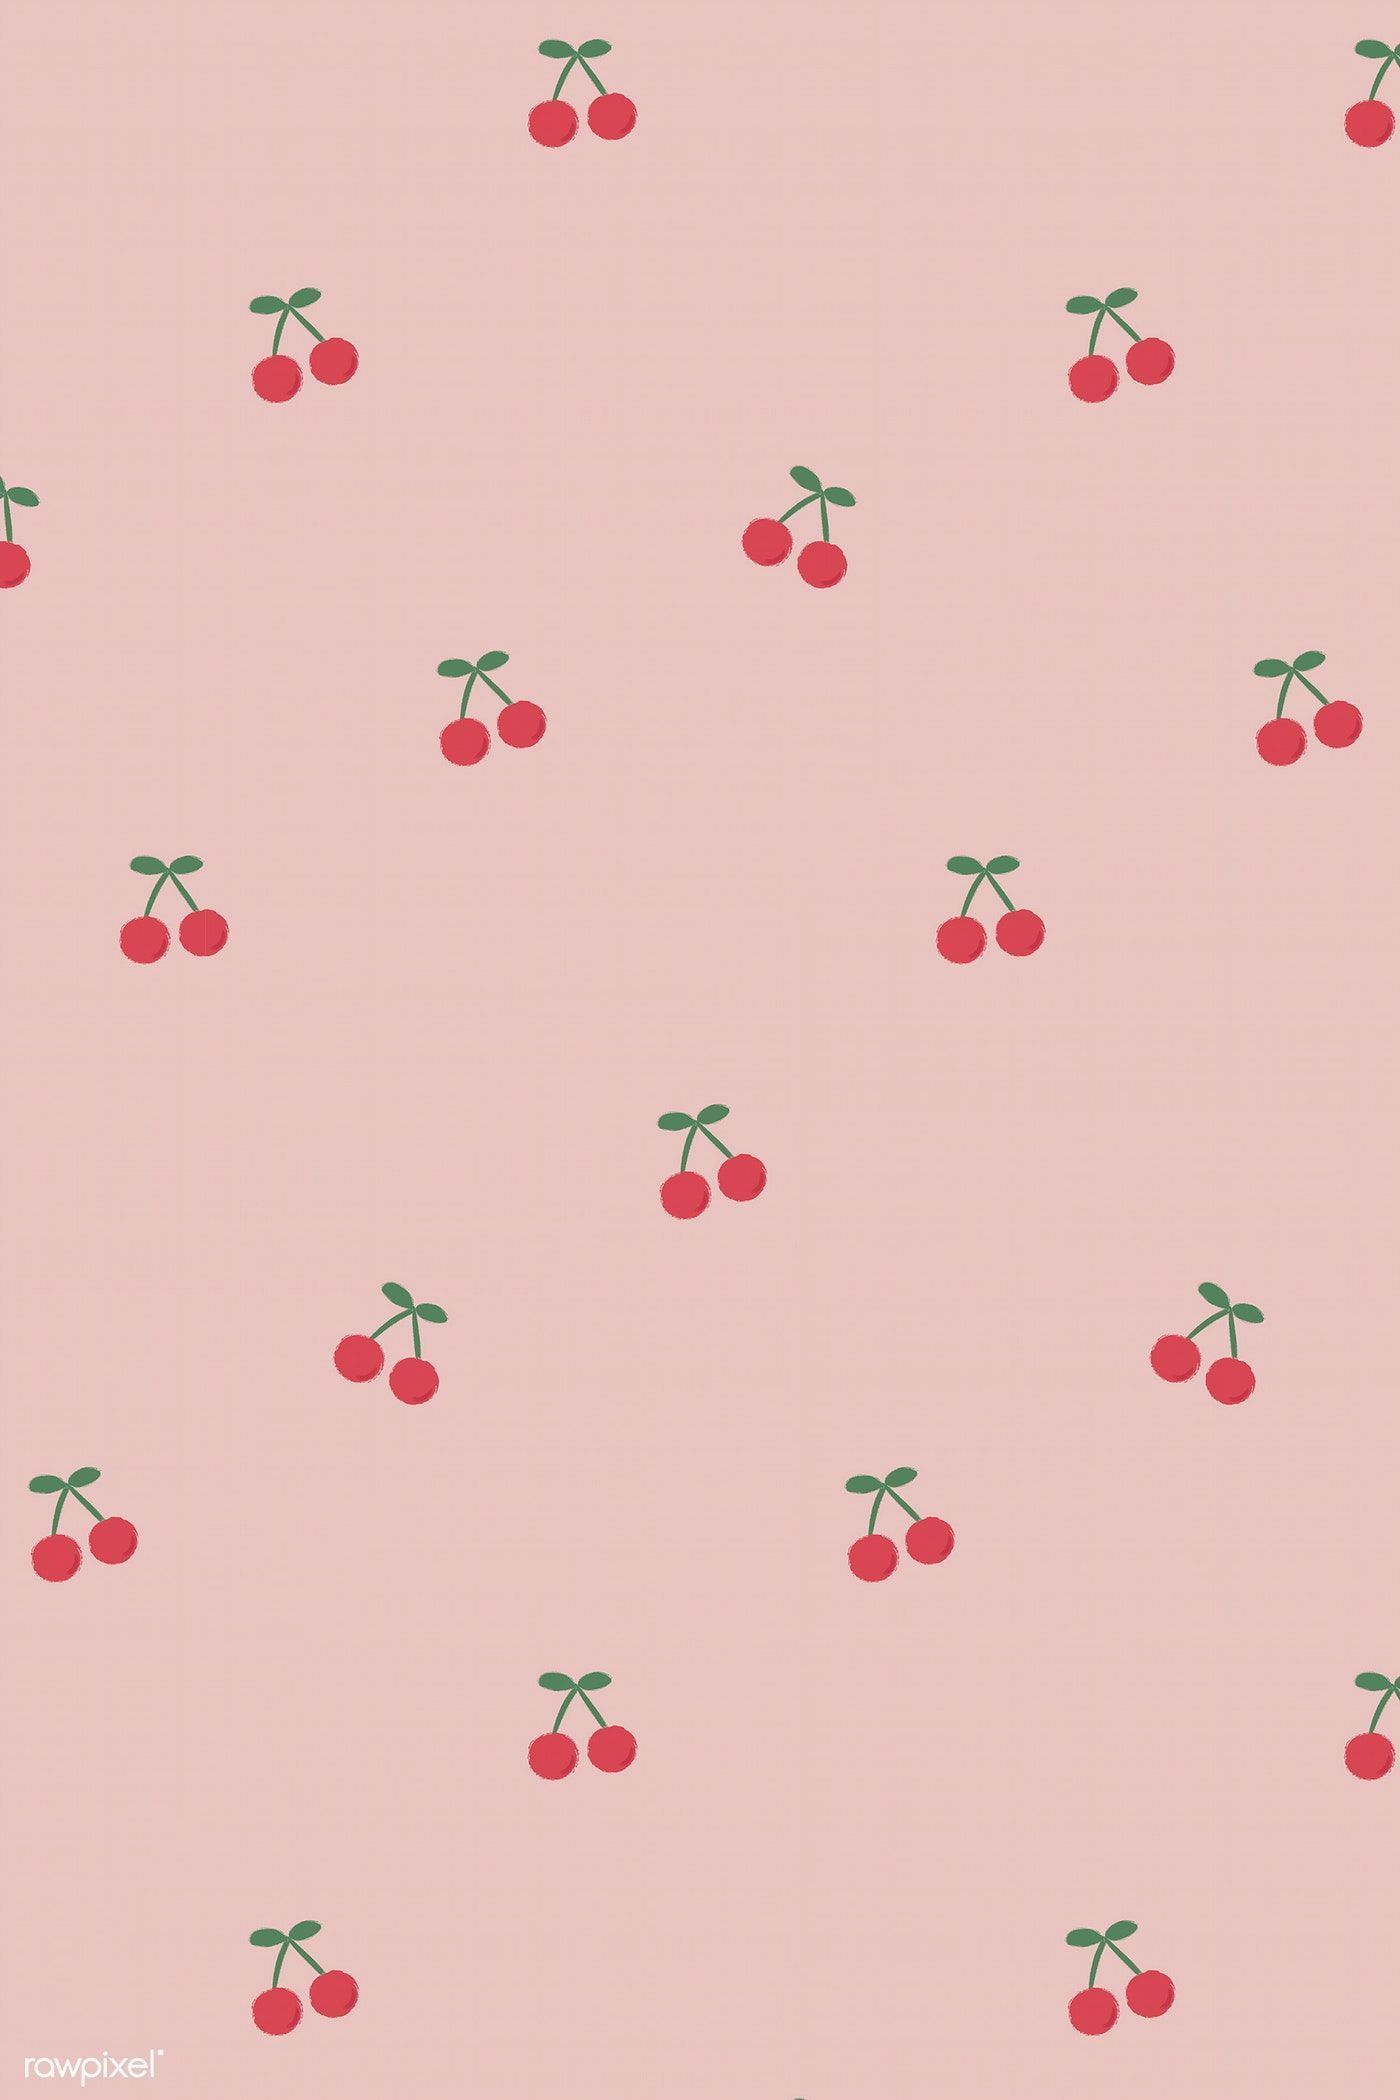 Cherries on a pink background - Cherry